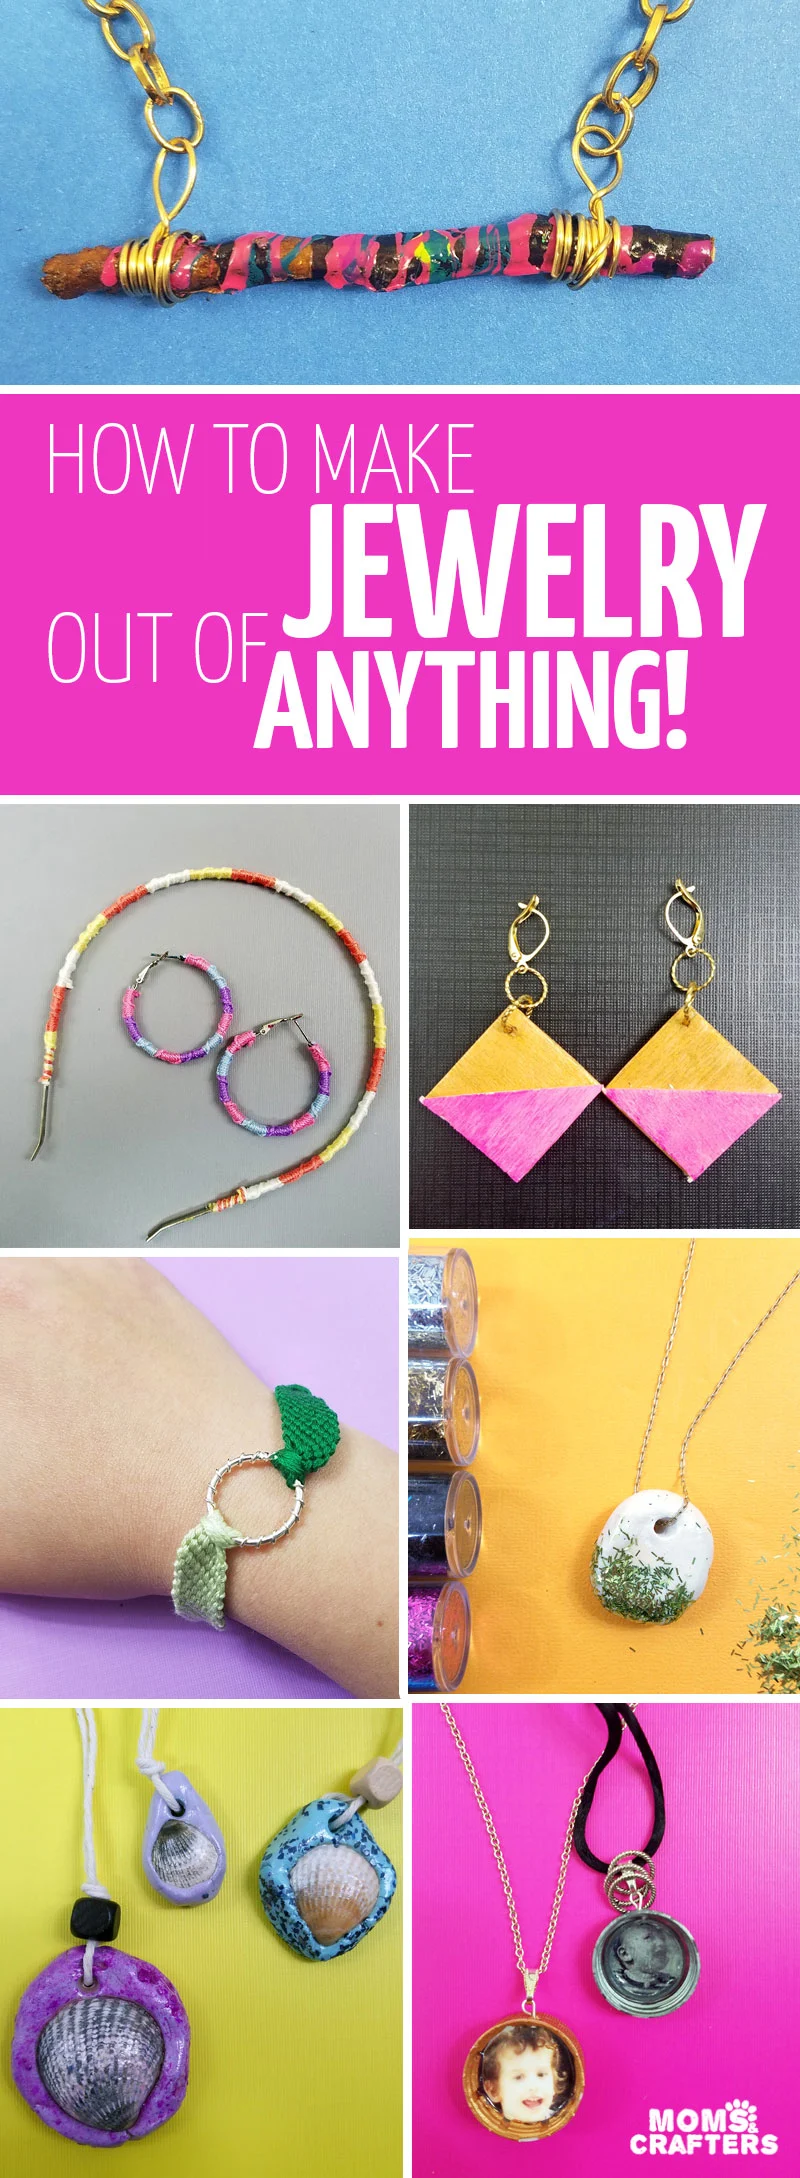 Want to learn how to make jewelry out of anything? Click to learn more about this cool jewelry making book for beginners, teens, tweens, and anyone who wants to learn! You'll also learn the basics of jewelry making, with fun recycled projects, nature proejcts, and more.